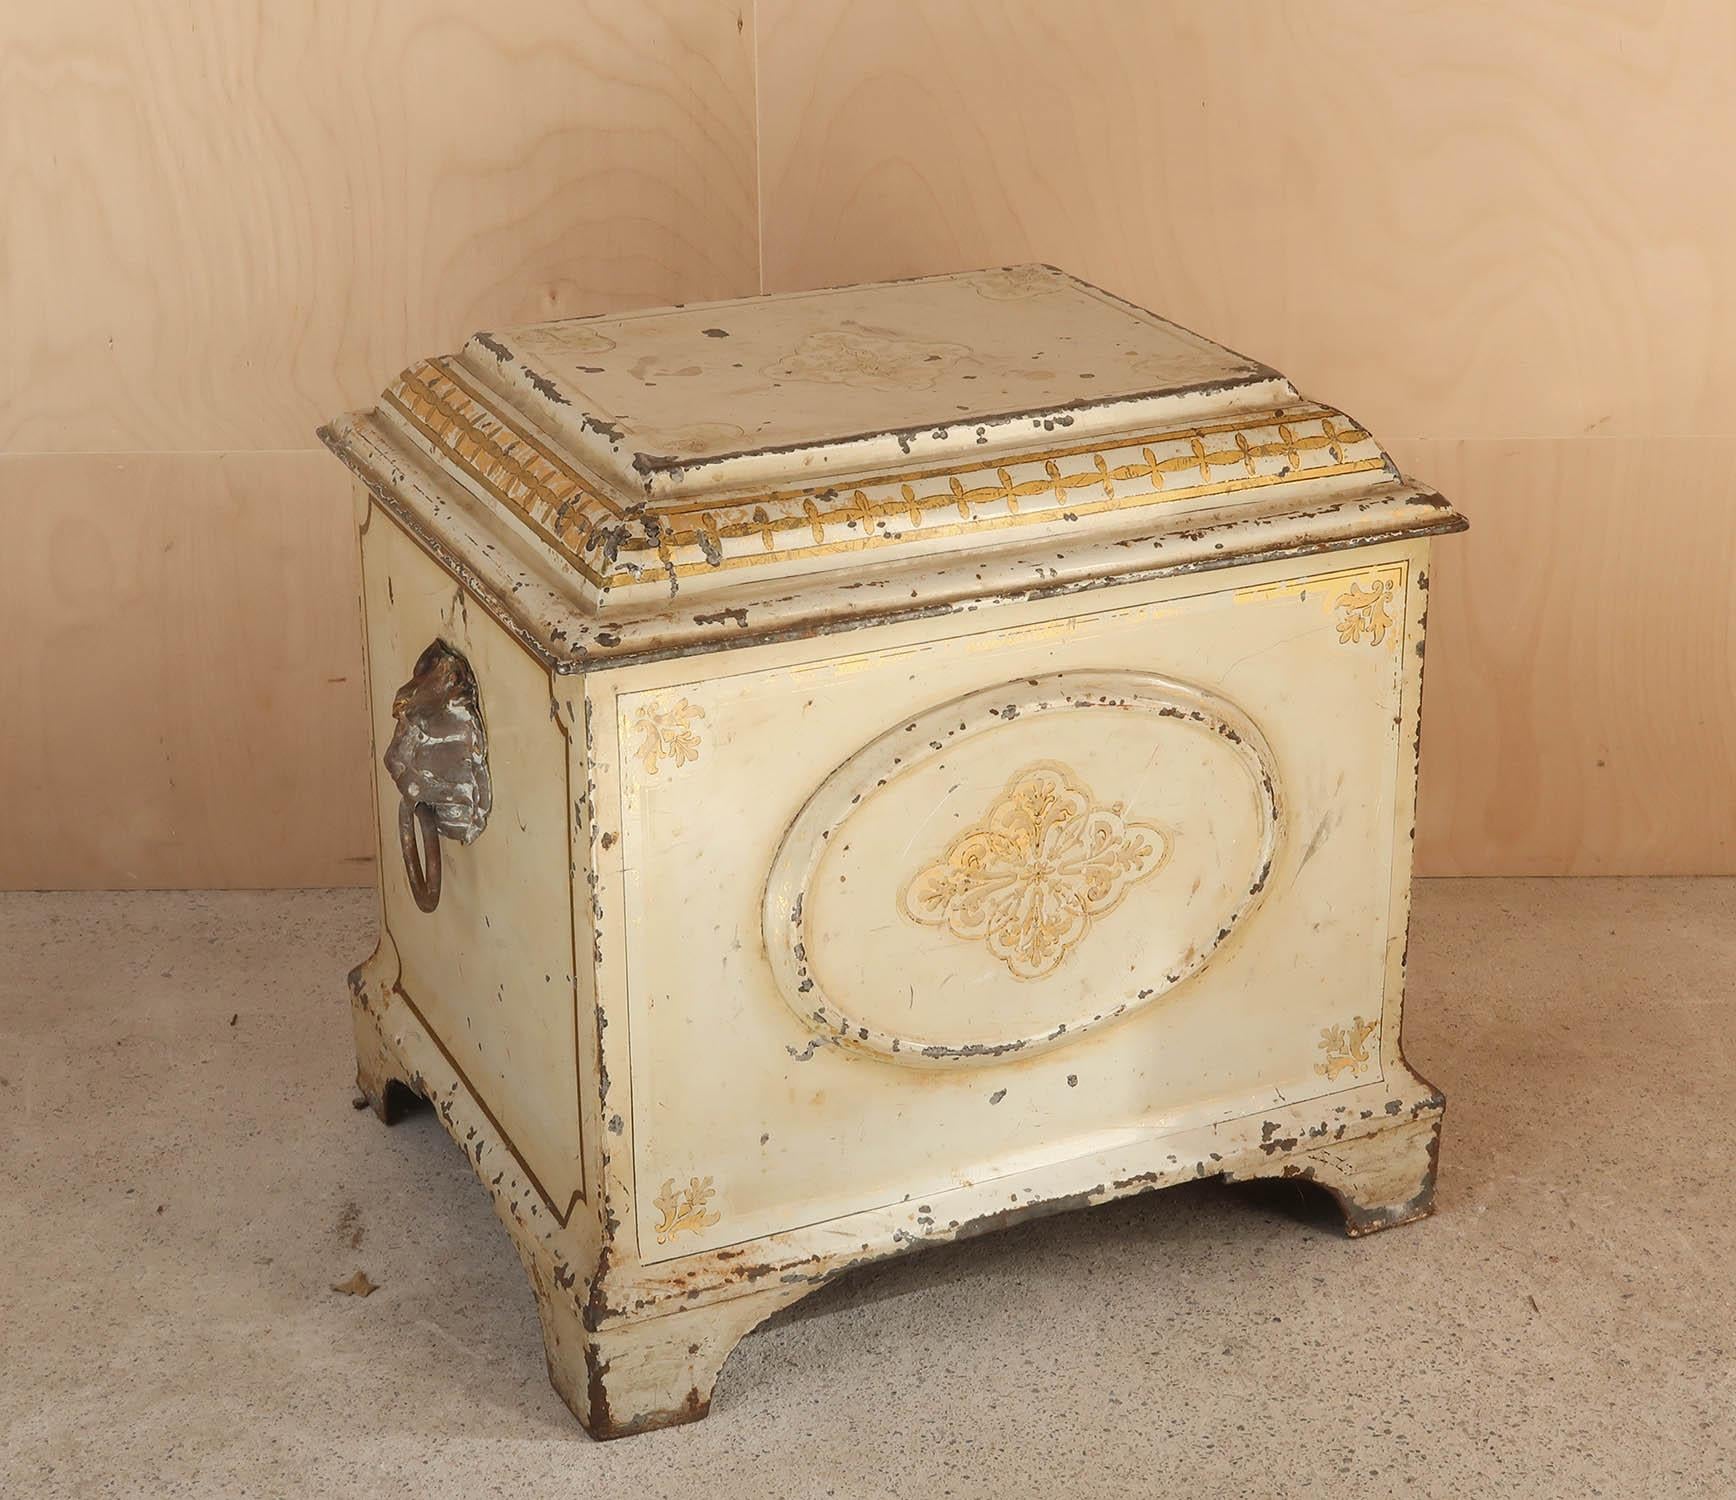 Wonderful toleware chest

Not sure what the original function was. No evidence to suggest it was a coal bin.

Cream painted with gilt decoration in neoclassical style. Original paint.

Black Japanned interior

Countryhouse condition. Structurally